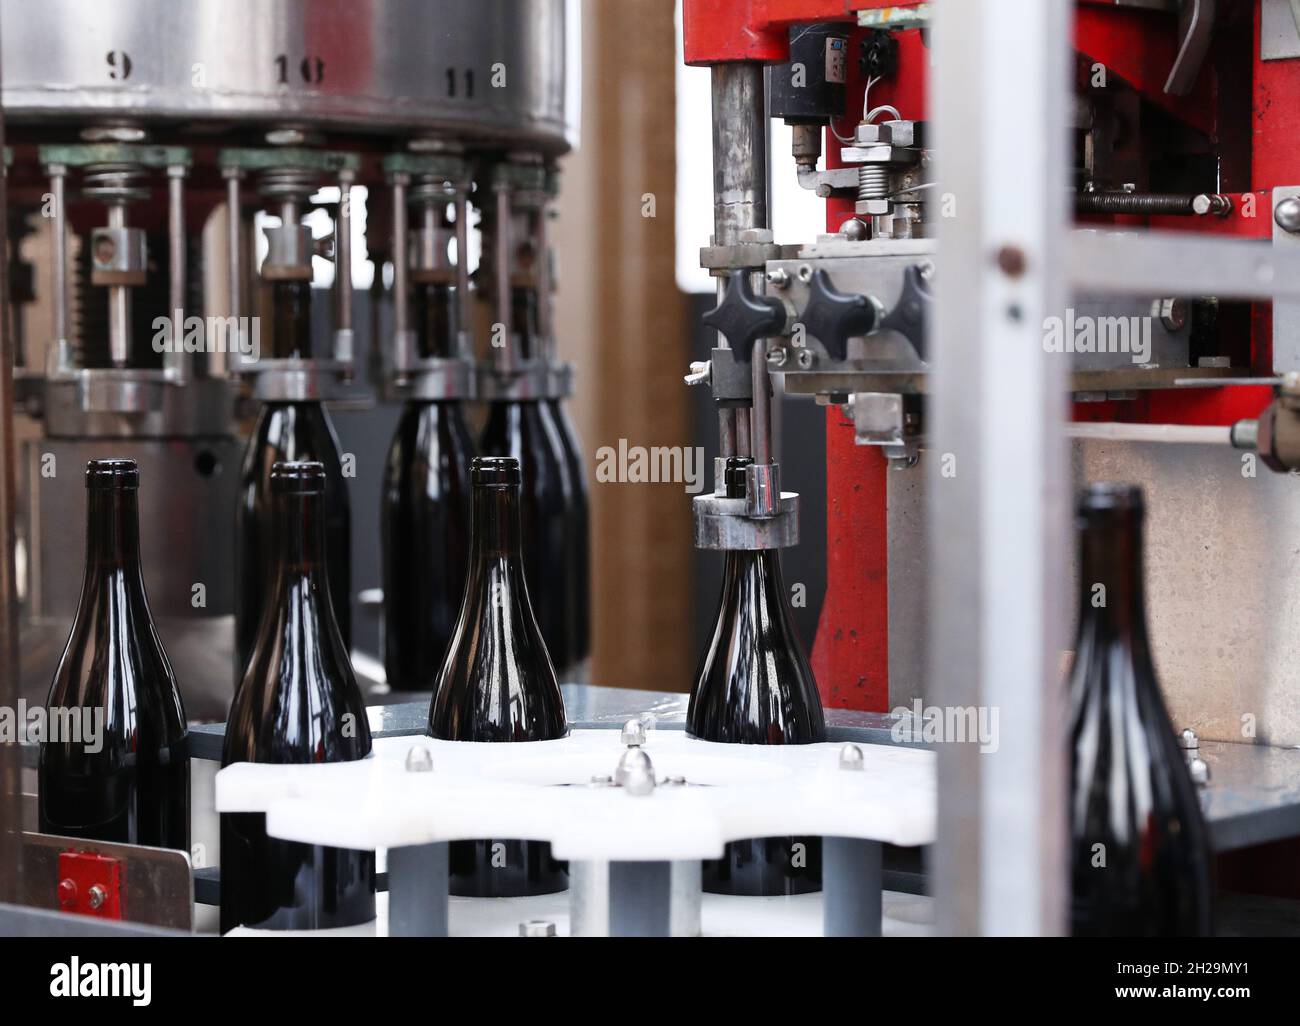 Paris, France. 20th Oct, 2021. Photo taken on Oct. 20, 2021 shows the product line of wine bottling at the first floor of the Eiffel Tower in Paris, France. The second batch of 'Chai de la tour Eiffel' wine was released here on Wednesday. Credit: Gao Jing/Xinhua/Alamy Live News Stock Photo